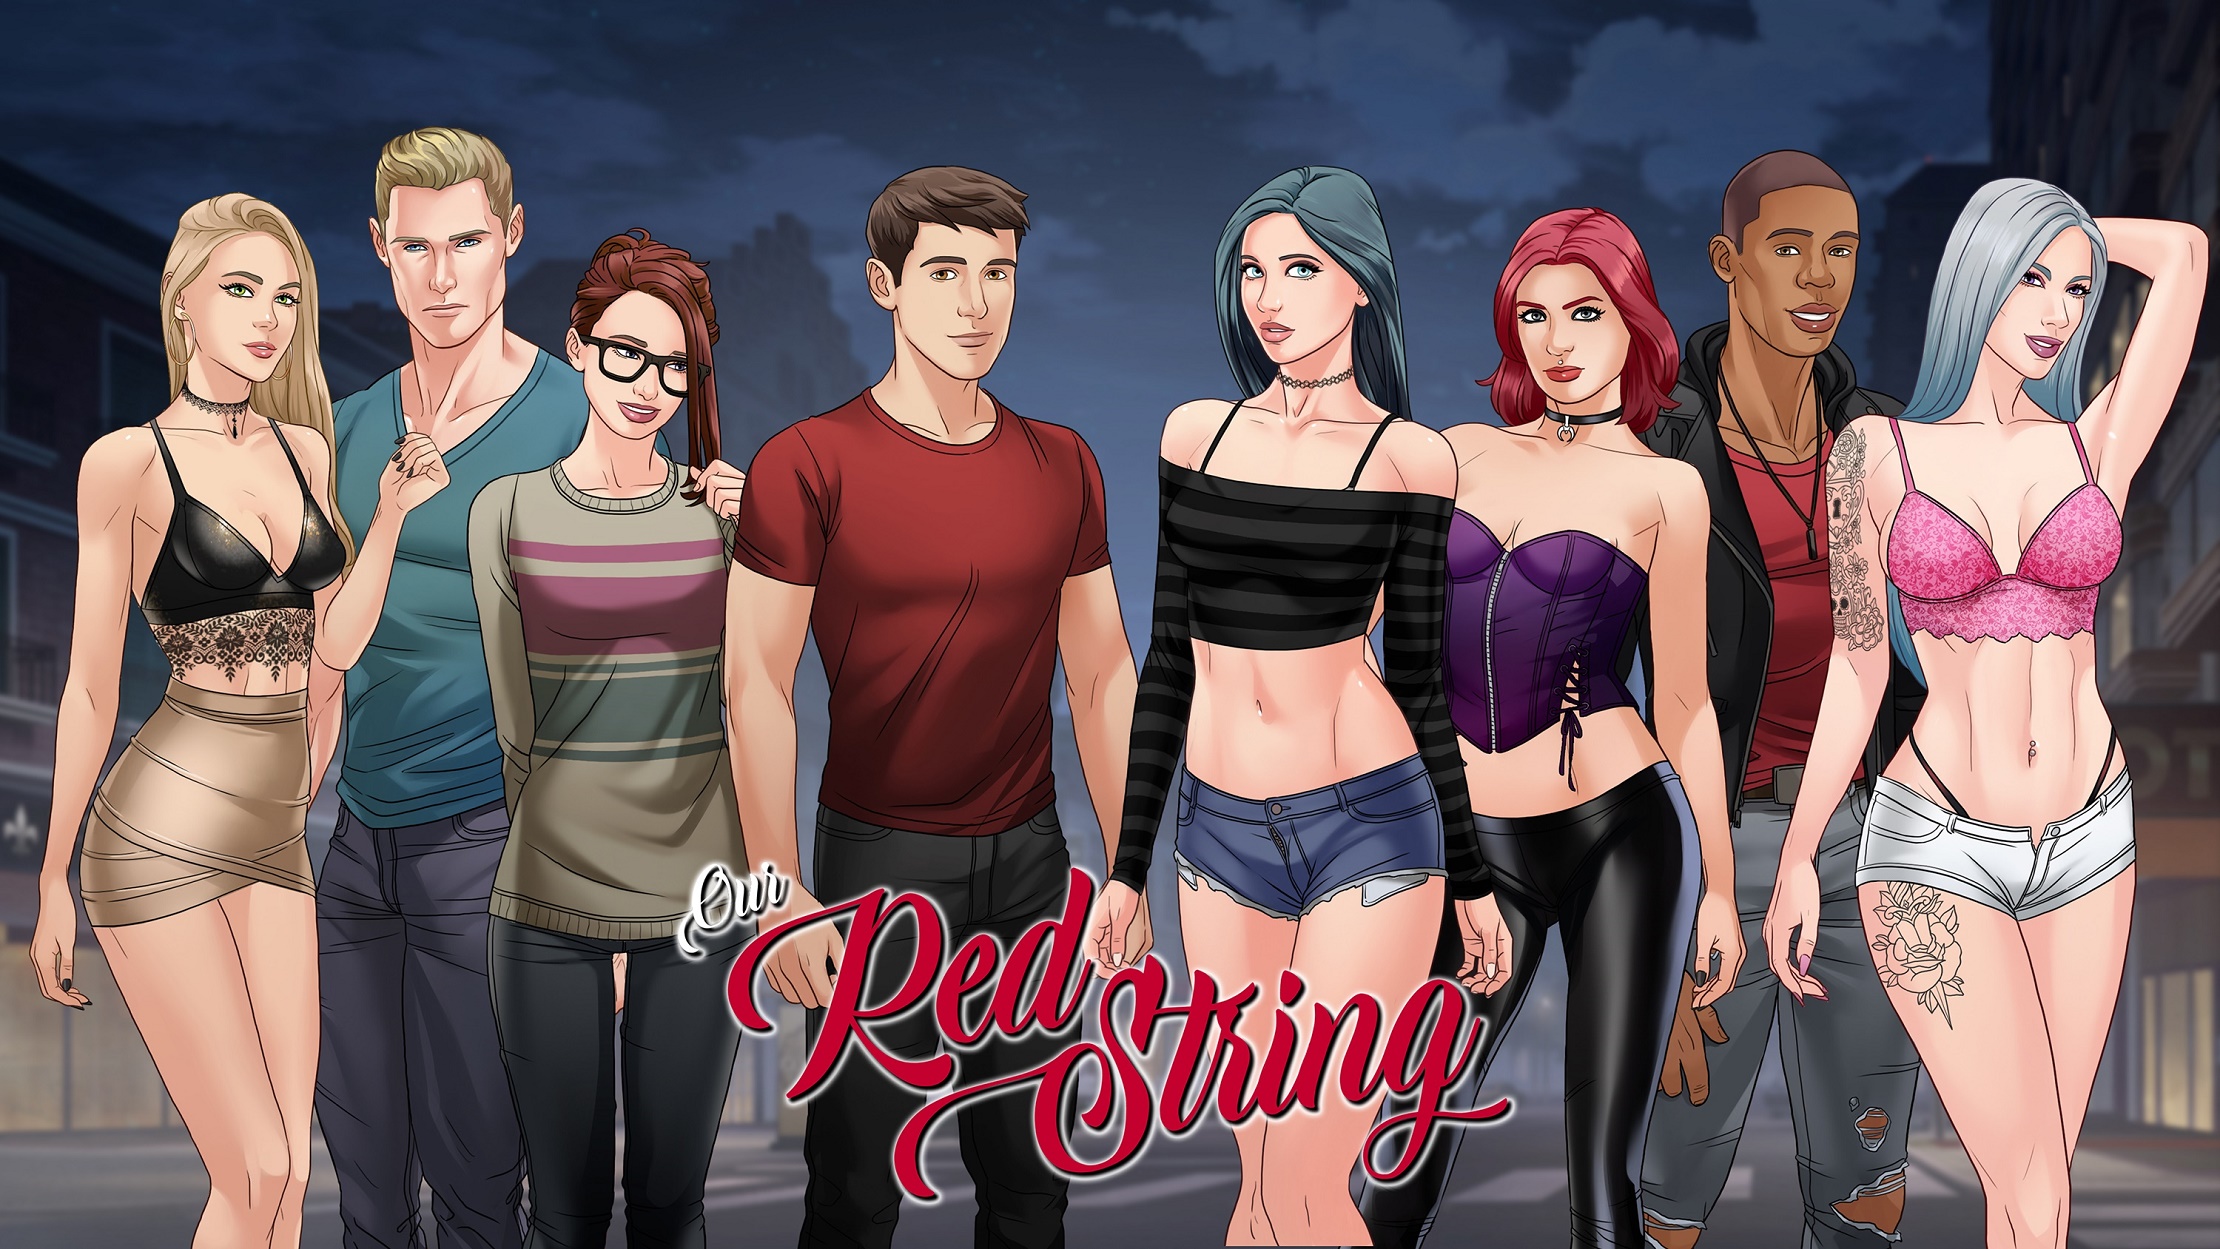 Download game - Our Red String by Creator EvaKiss.